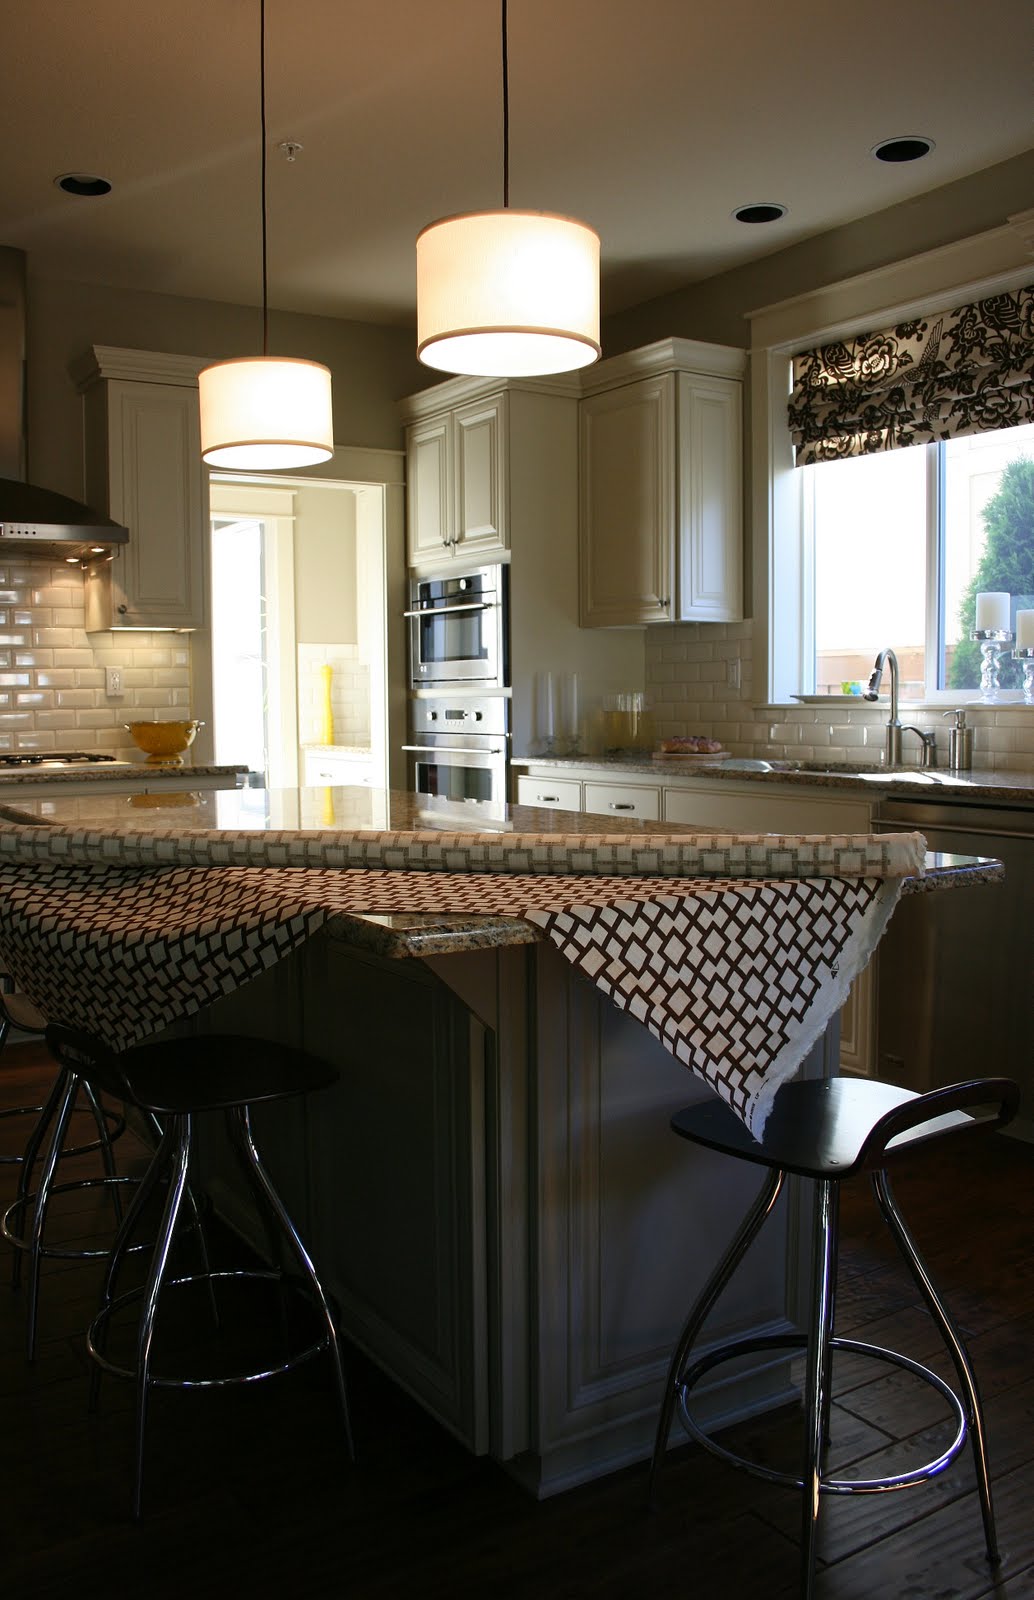 Isabella & Max Rooms: Kitchen Island Pendant Project - How ...